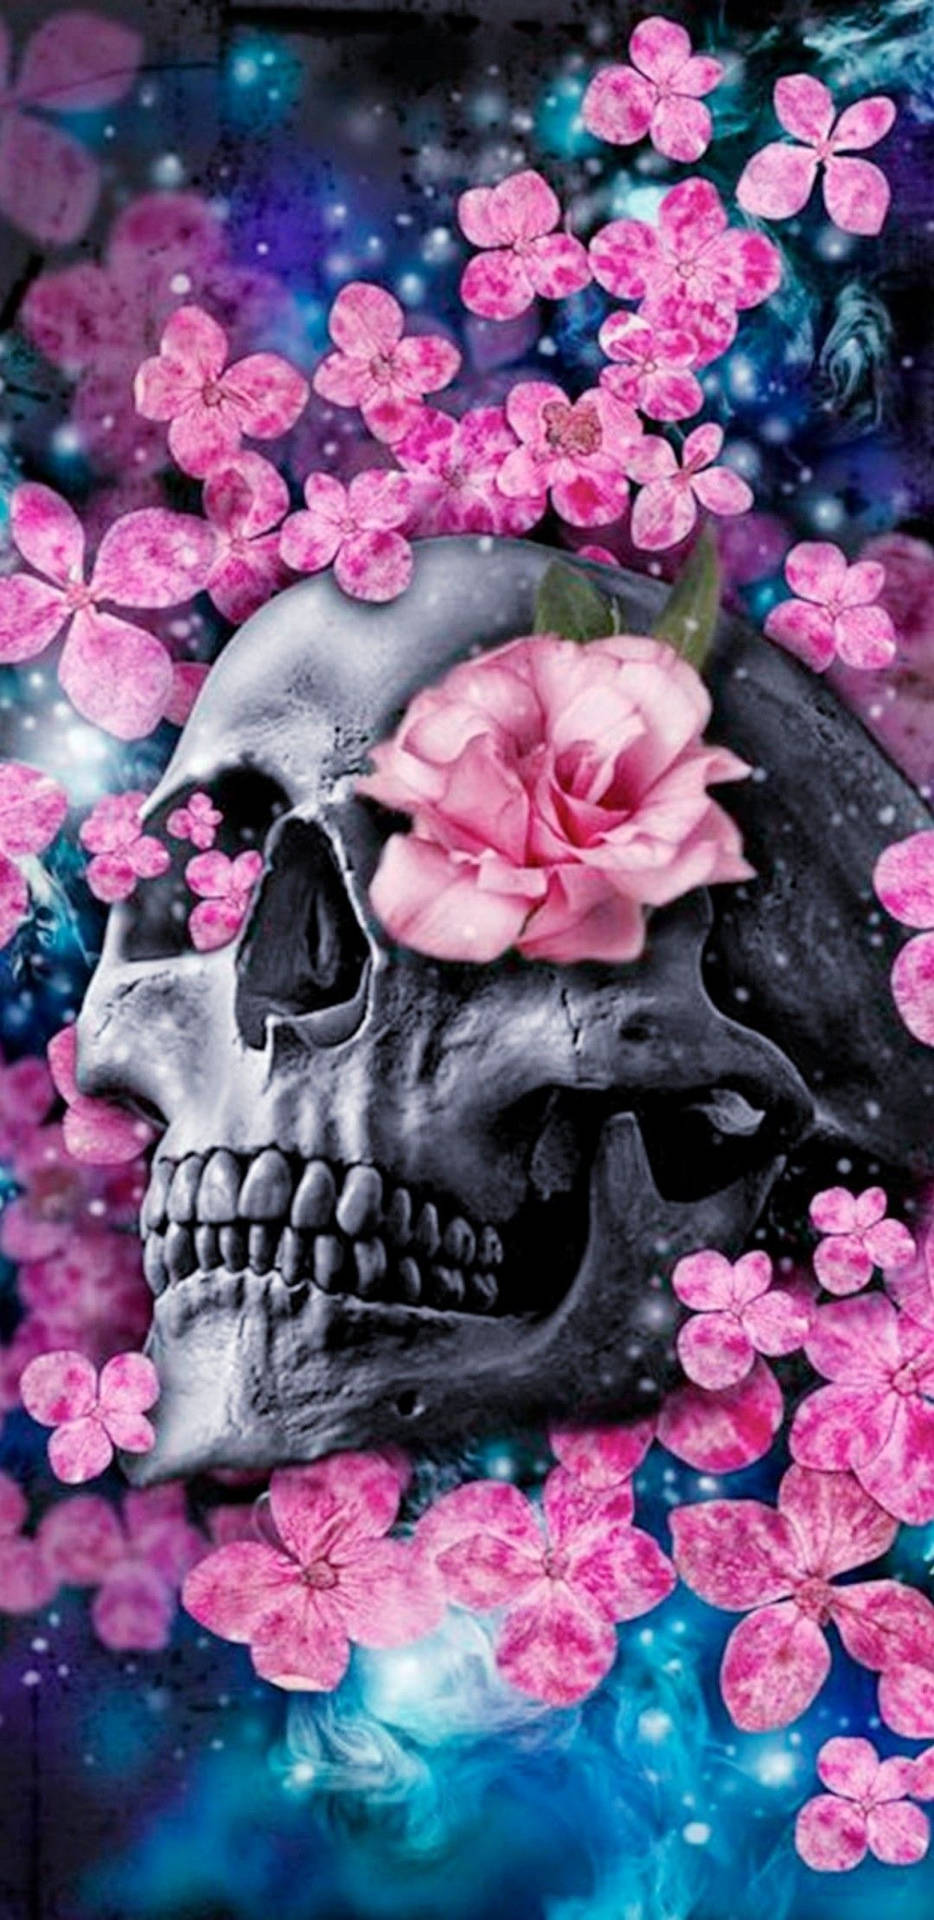 Cute Skeleton And Flowers Aesthetic Photo Background